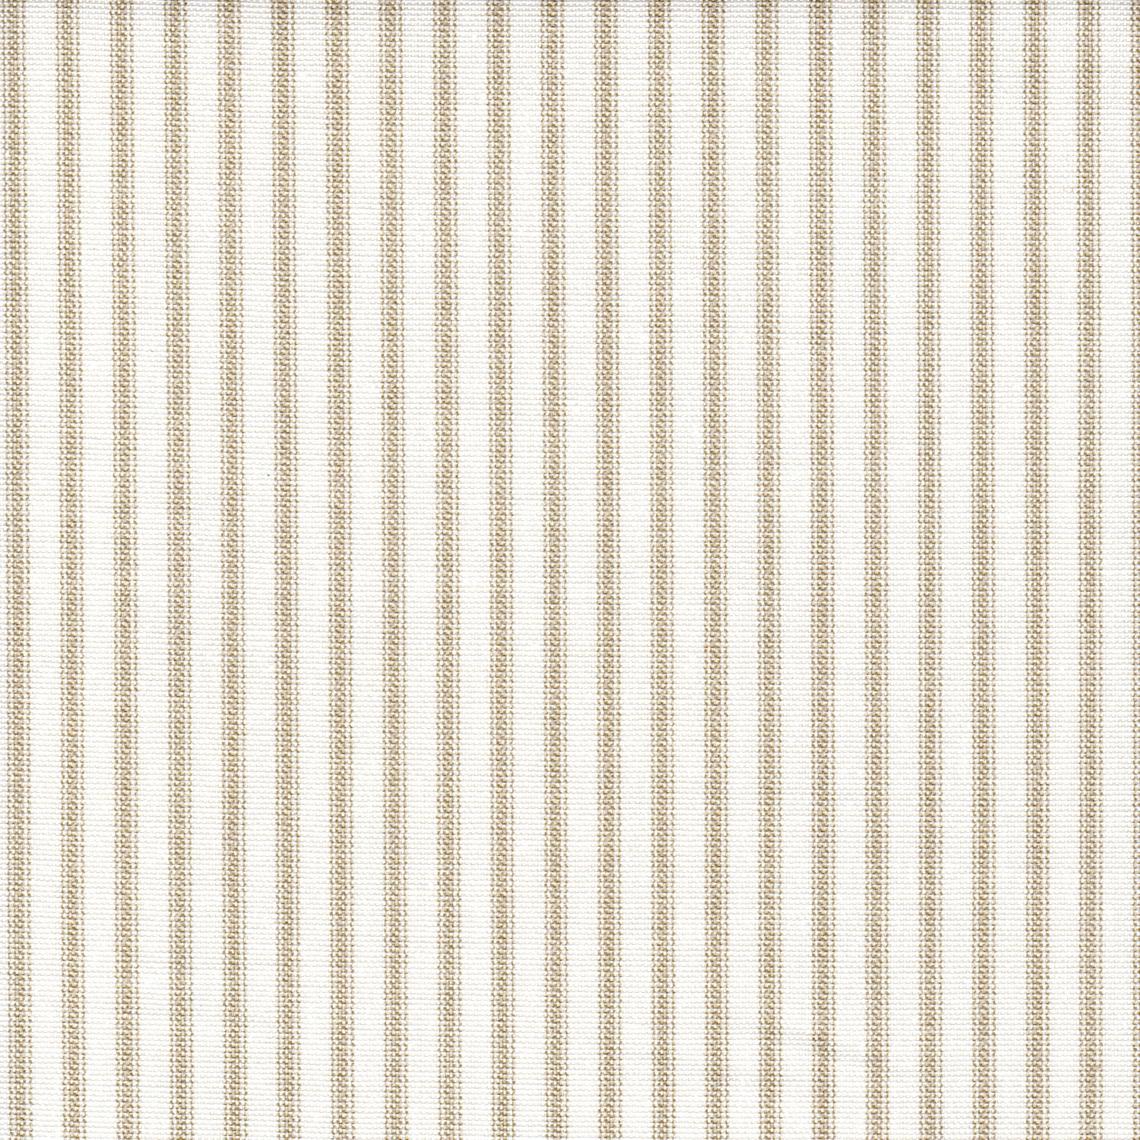 shower curtain in farmhouse sand beige traditional ticking stripe